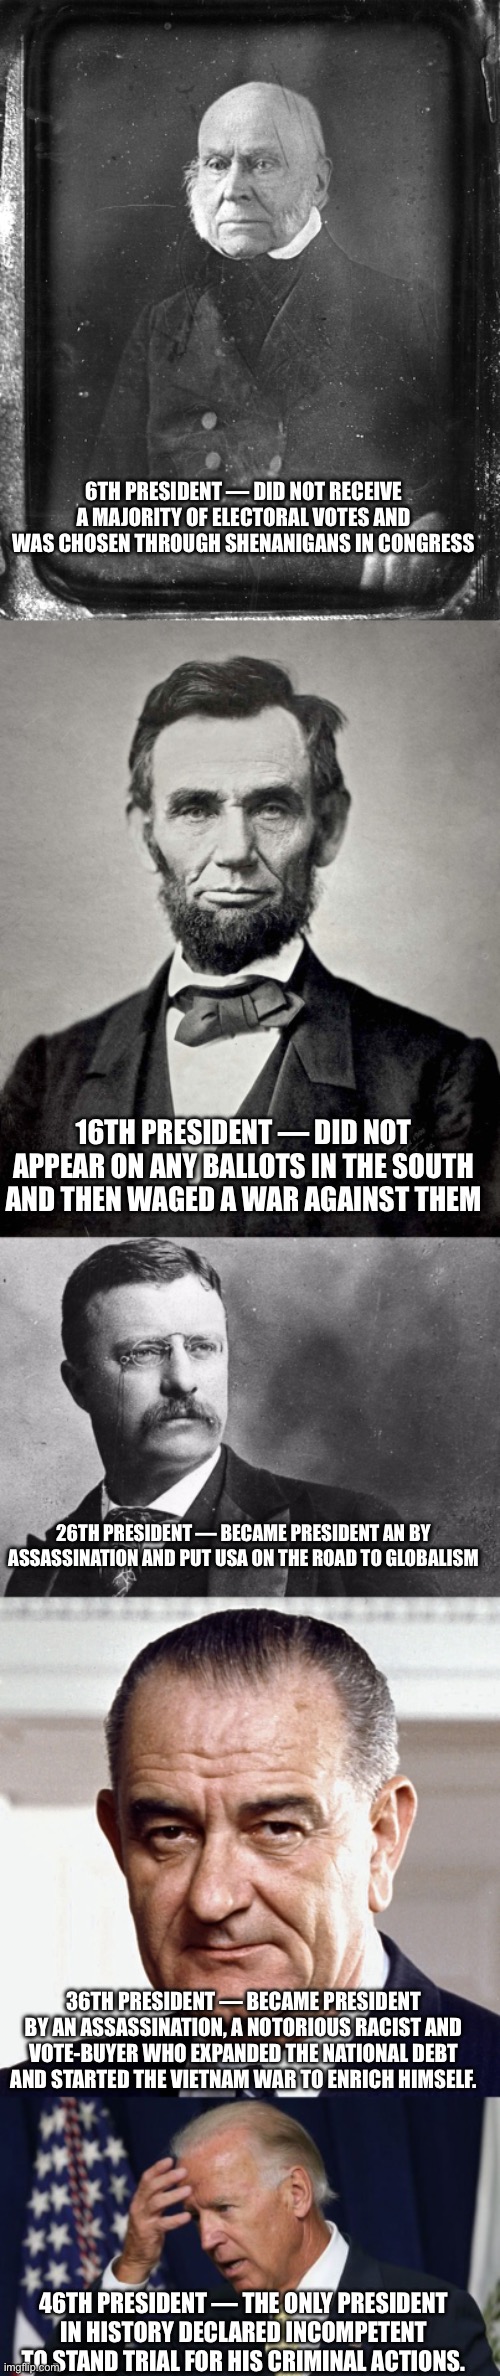 6TH PRESIDENT — DID NOT RECEIVE A MAJORITY OF ELECTORAL VOTES AND WAS CHOSEN THROUGH SHENANIGANS IN CONGRESS; 16TH PRESIDENT — DID NOT APPEAR ON ANY BALLOTS IN THE SOUTH AND THEN WAGED A WAR AGAINST THEM; 26TH PRESIDENT — BECAME PRESIDENT AN BY ASSASSINATION AND PUT USA ON THE ROAD TO GLOBALISM; 36TH PRESIDENT — BECAME PRESIDENT BY AN ASSASSINATION, A NOTORIOUS RACIST AND VOTE-BUYER WHO EXPANDED THE NATIONAL DEBT AND STARTED THE VIETNAM WAR TO ENRICH HIMSELF. 46TH PRESIDENT — THE ONLY PRESIDENT IN HISTORY DECLARED INCOMPETENT TO STAND TRIAL FOR HIS CRIMINAL ACTIONS. | image tagged in john quincy adams,abraham lincoln,theodore roosevelt,joe biden worries | made w/ Imgflip meme maker